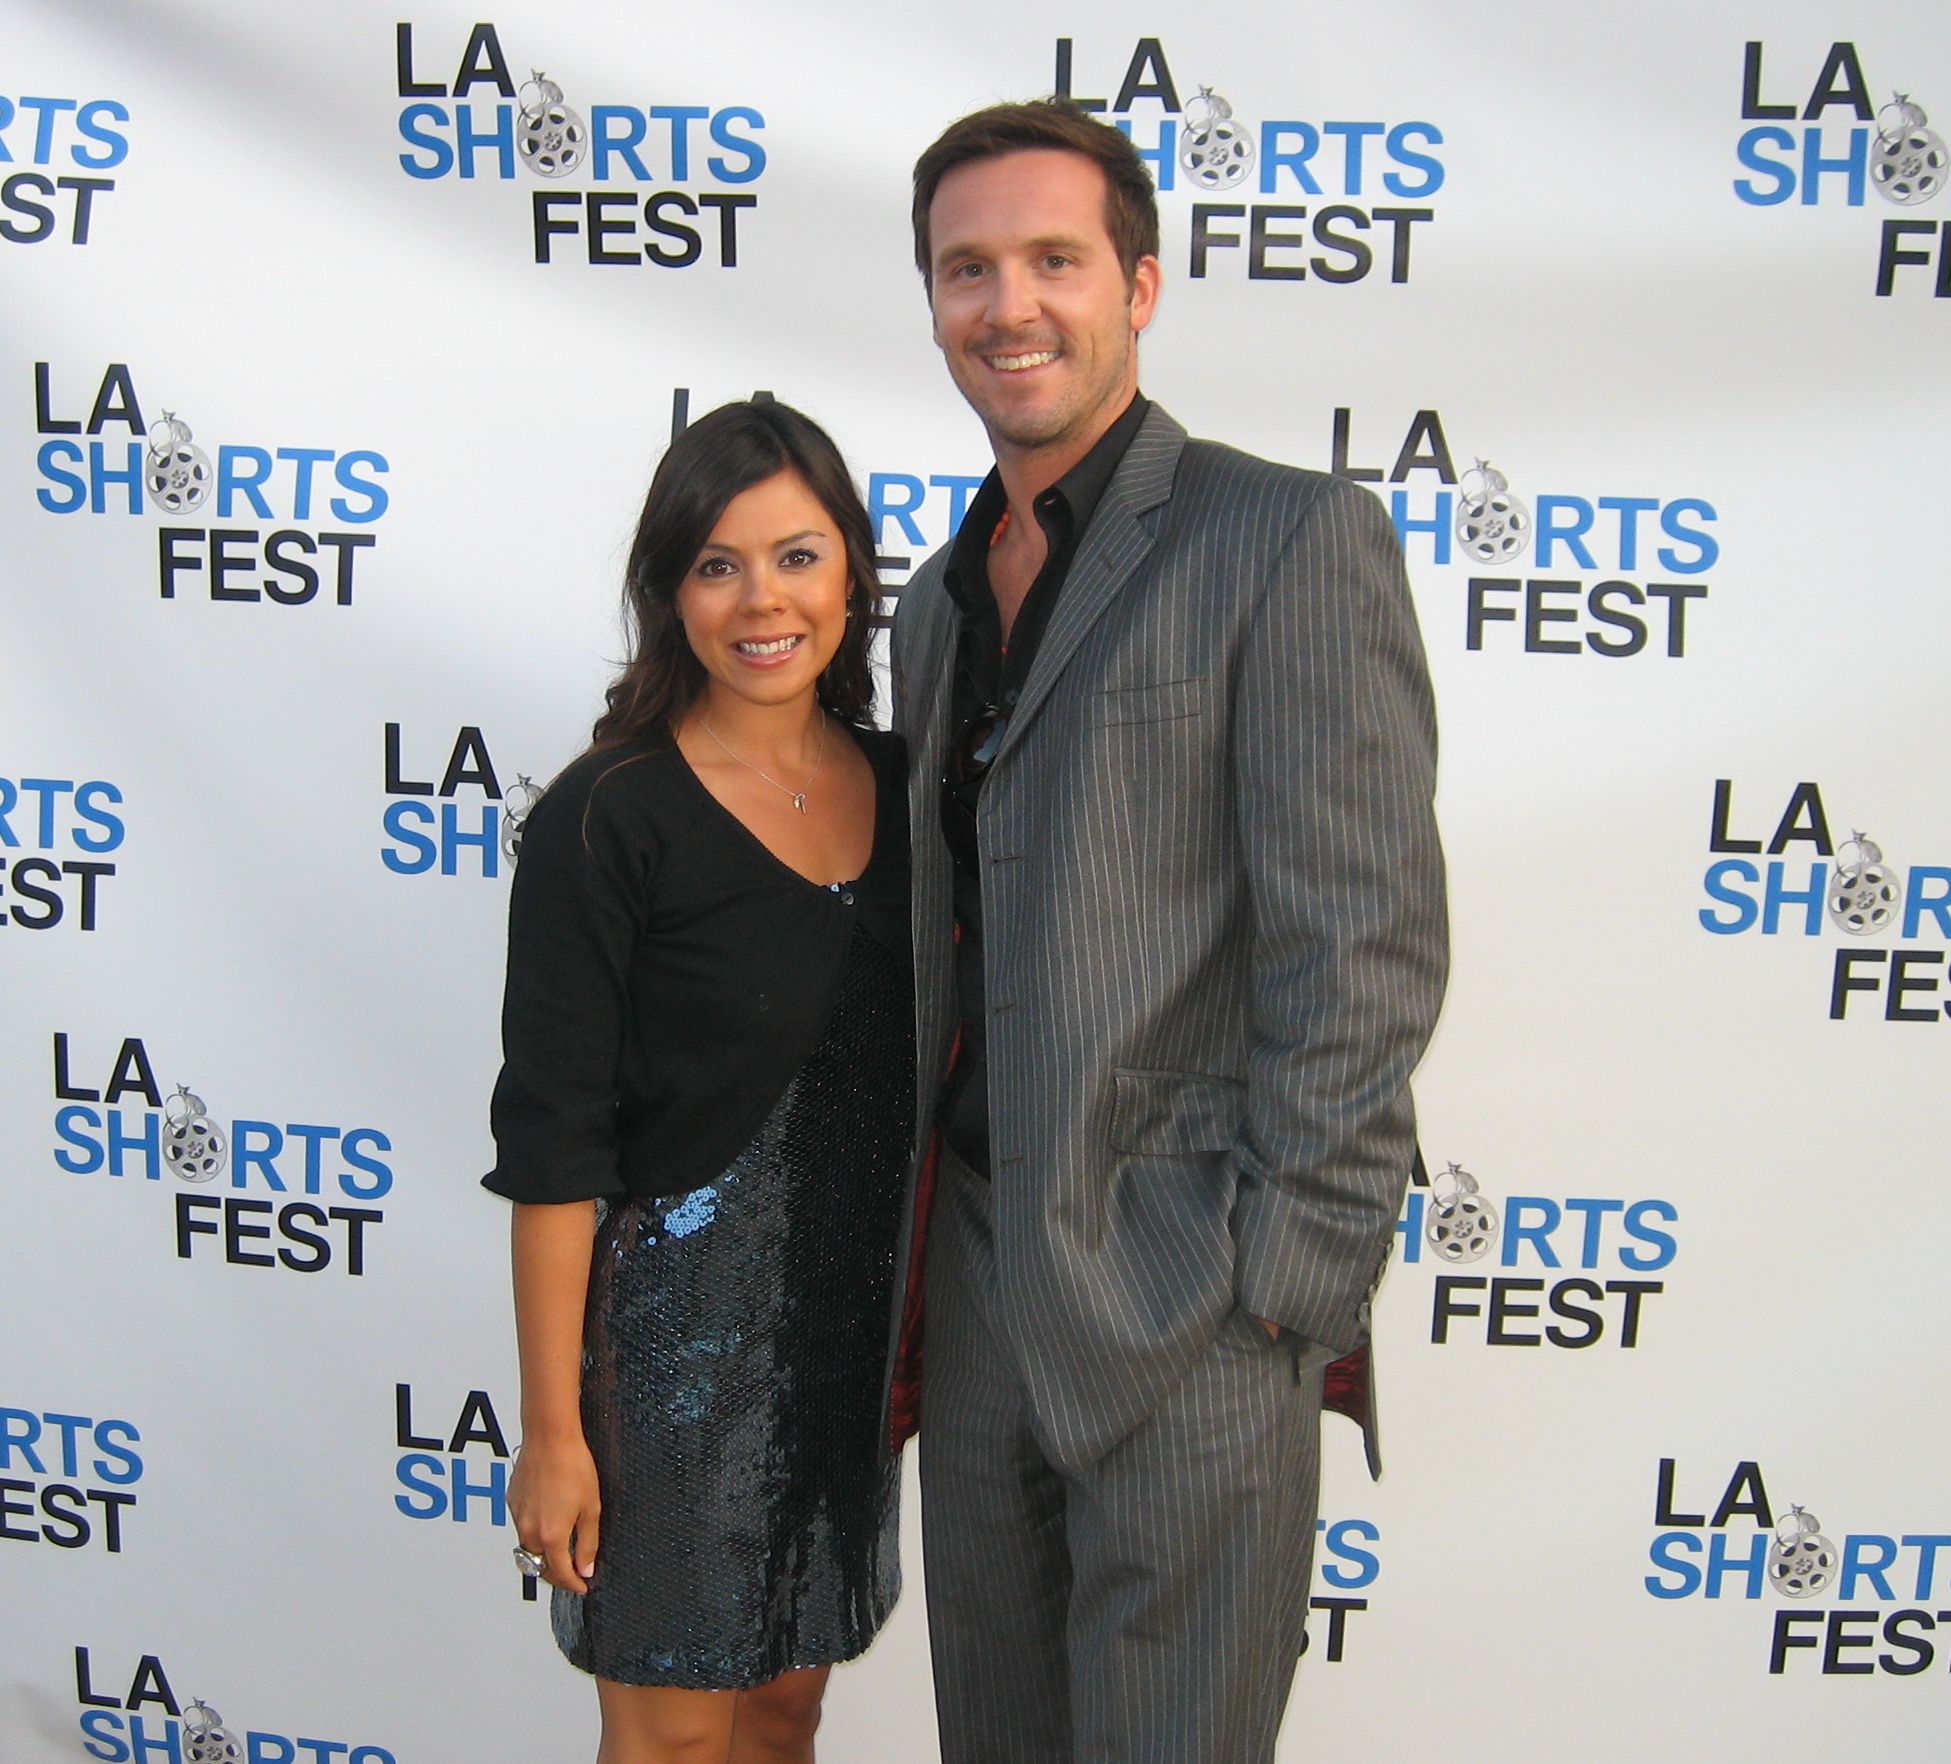 Mark Robert Provencher and wife, Jennifer Provencher at the world premiere screening of 